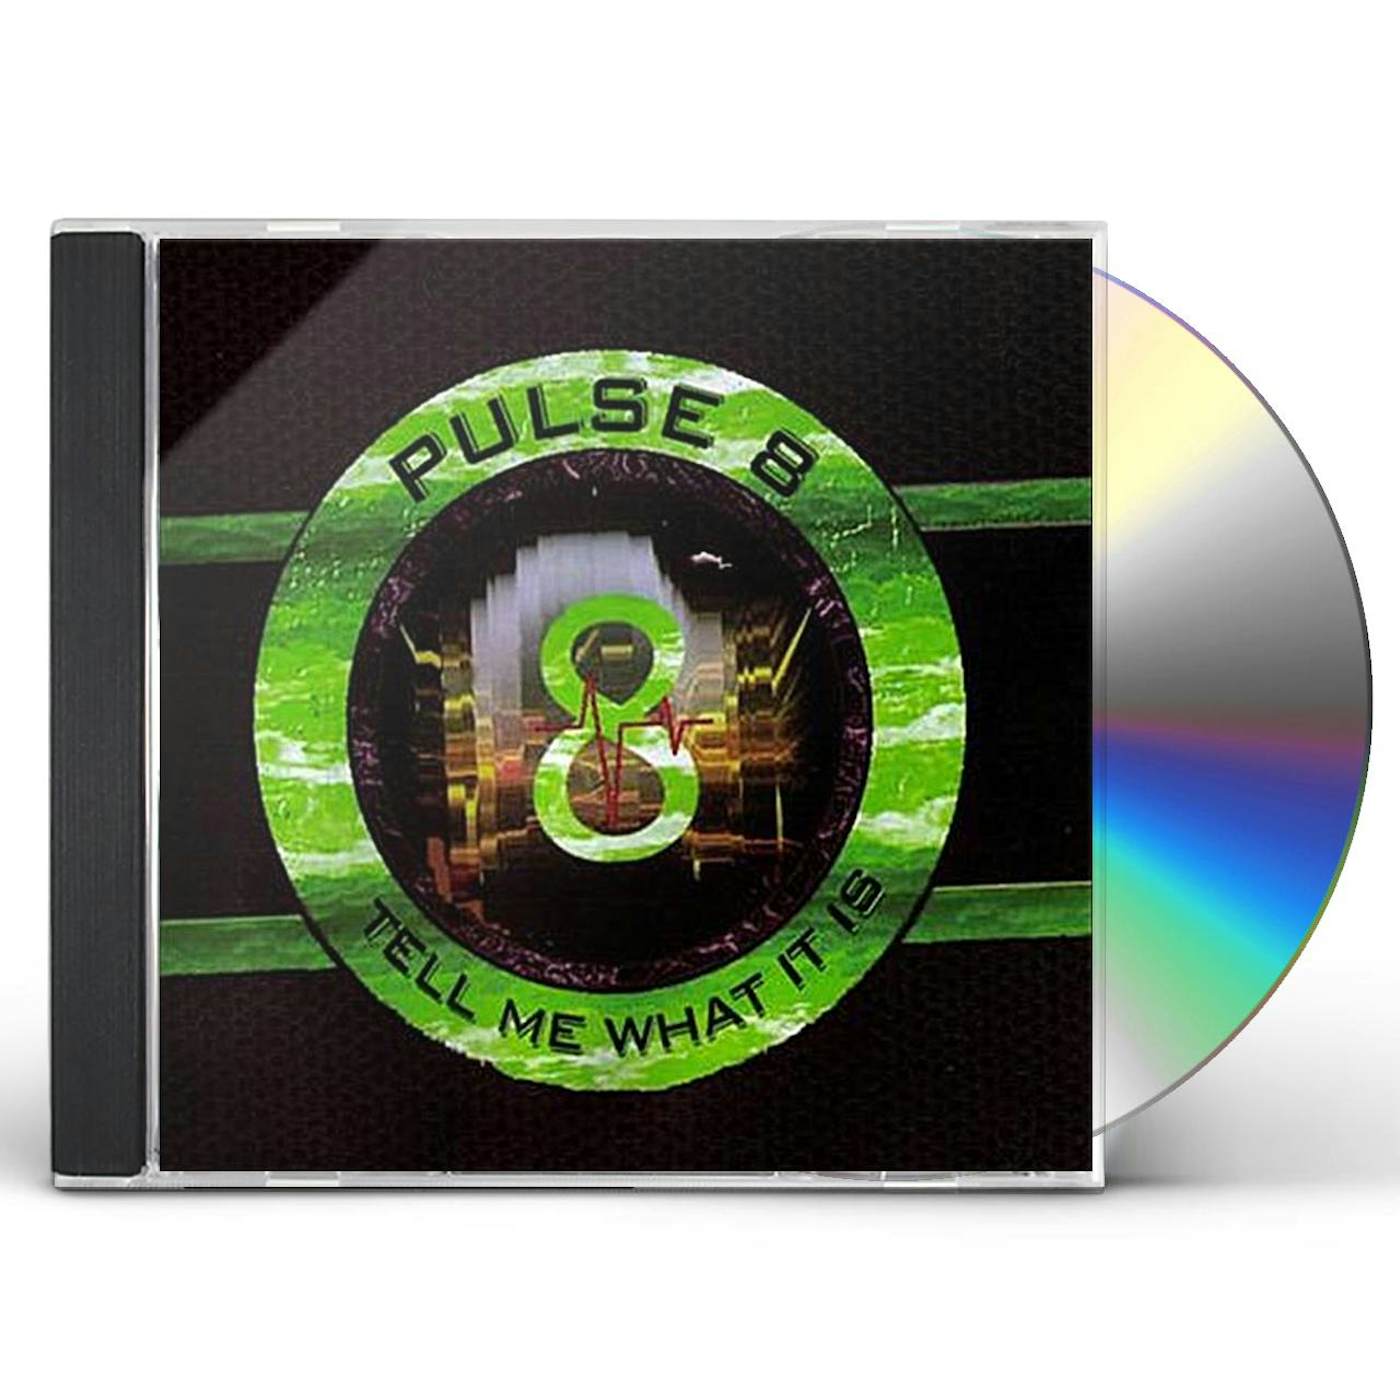 Pulse8 TELL ME WHAT IT IS CD